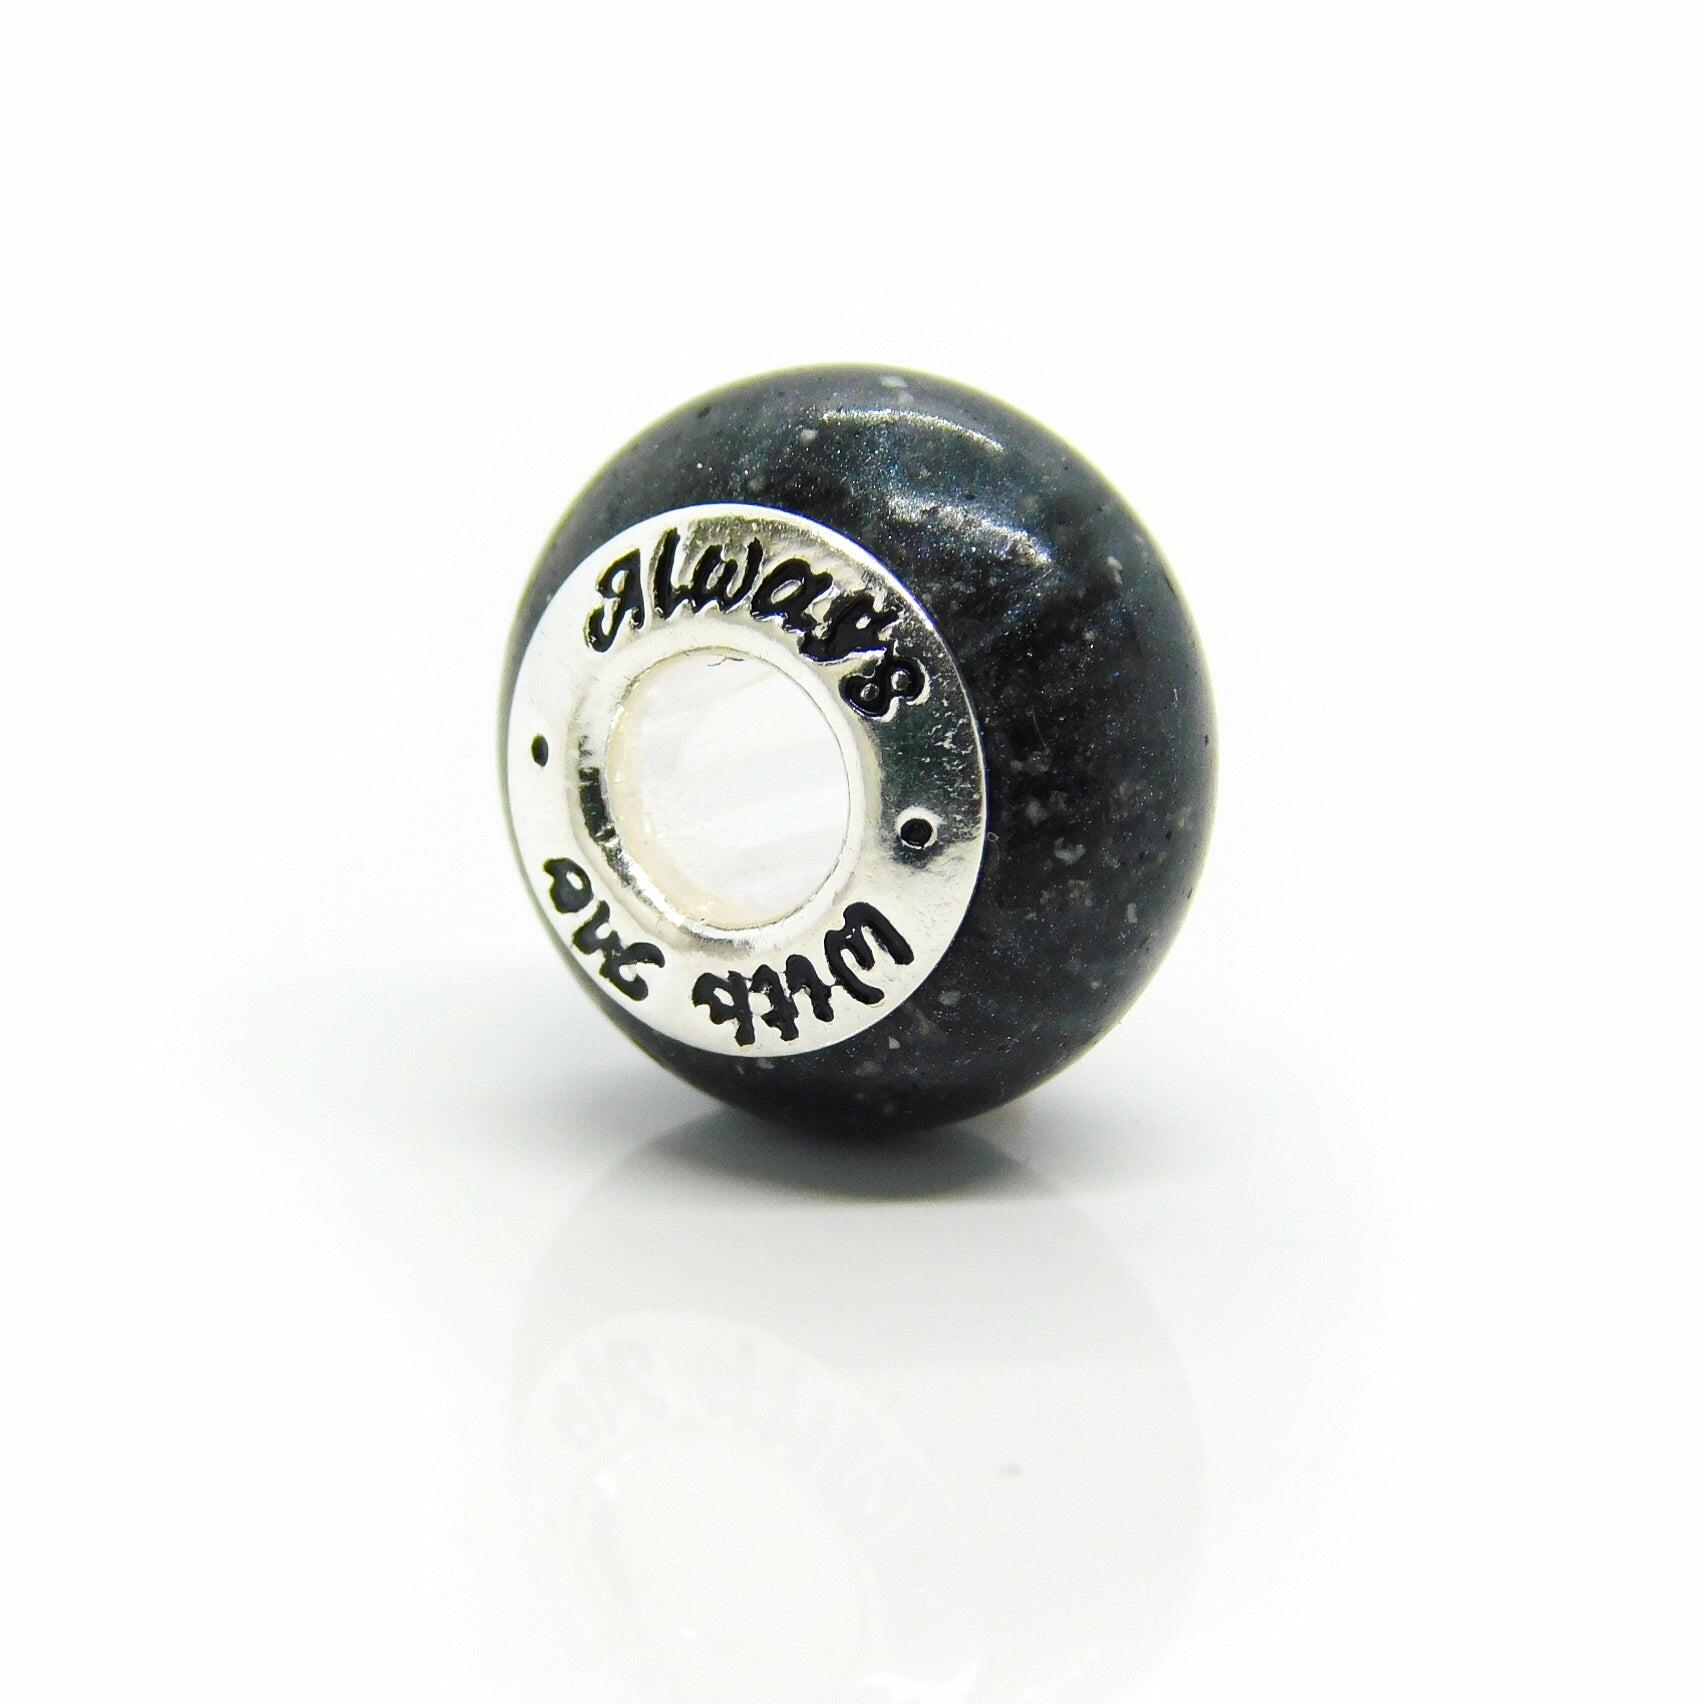 Black Bead Charm for a Pandora style Snake Bracelet. Contains Ashes and has Sterling Silver Inserts with Always With You engraved.